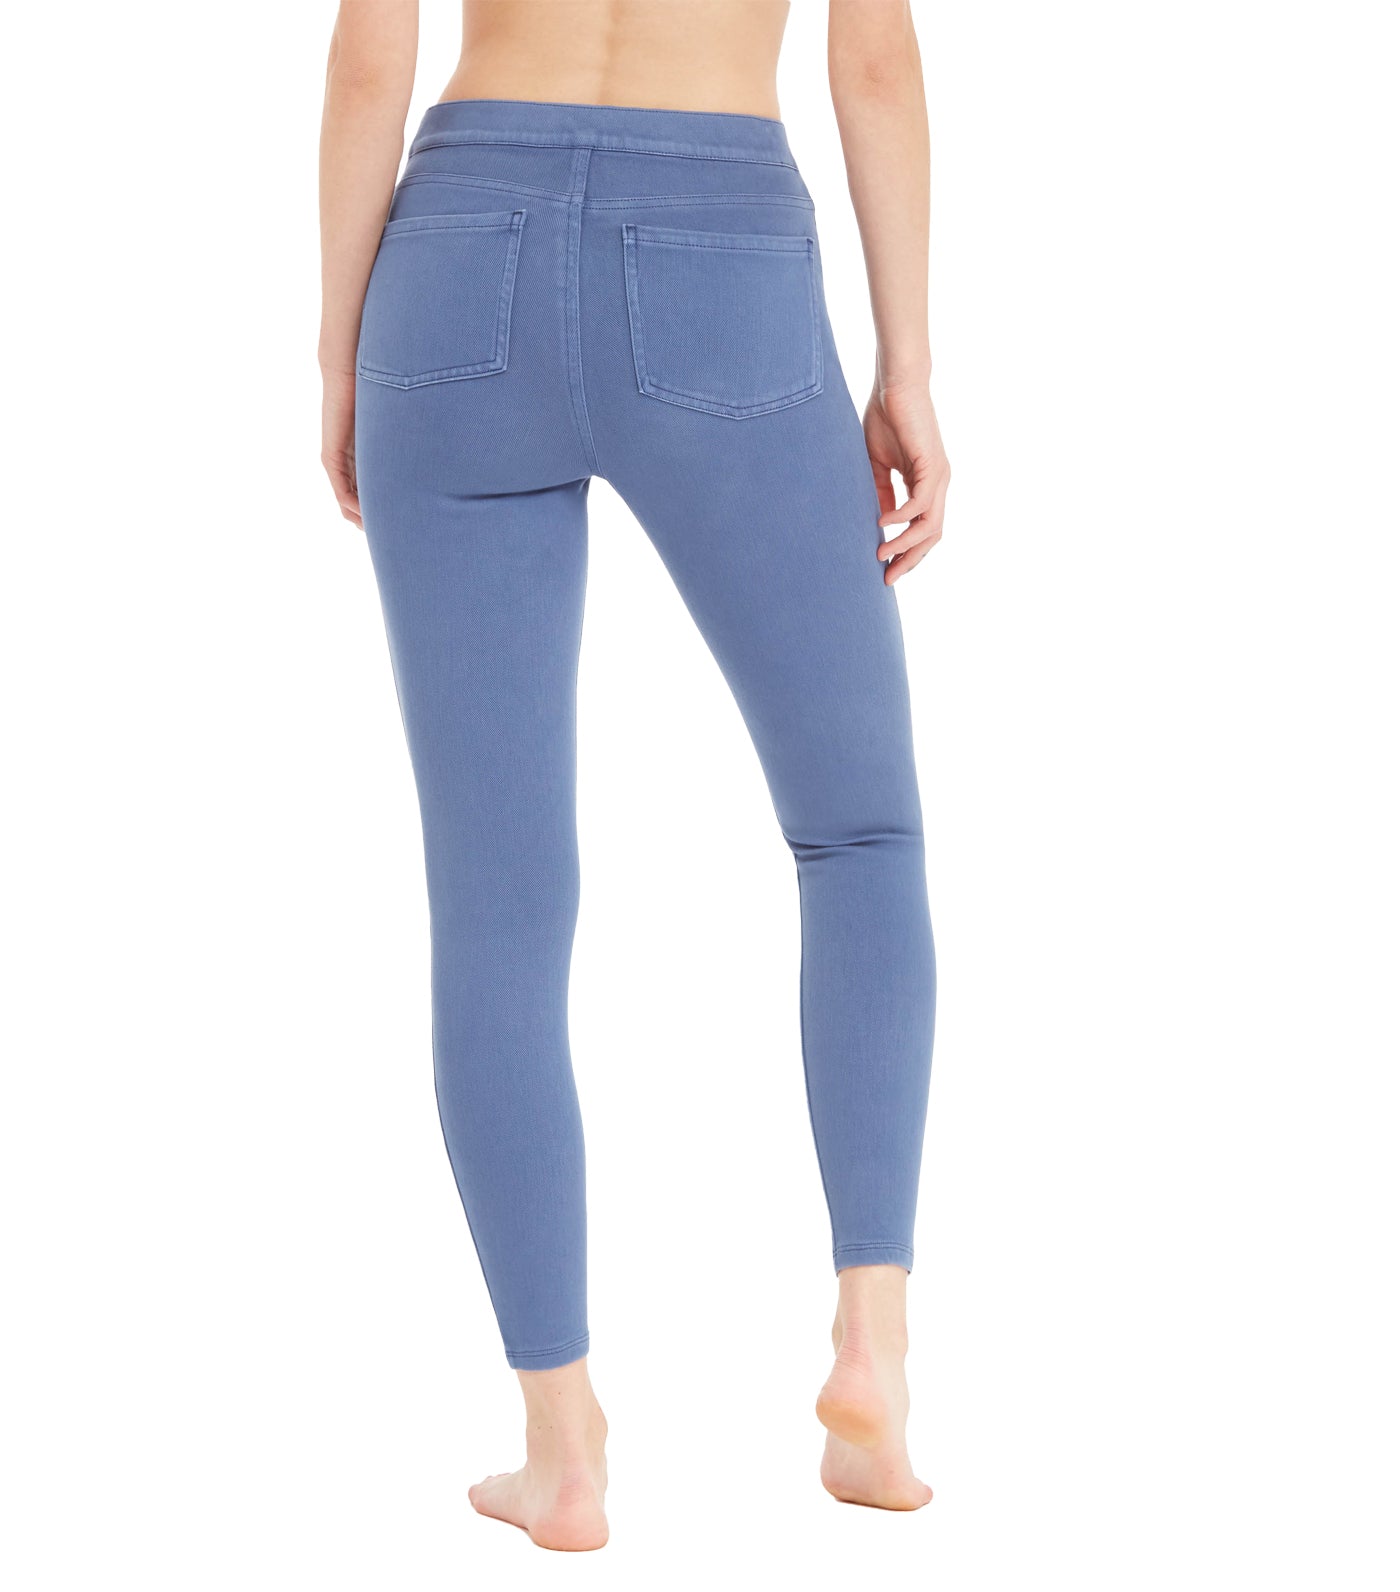 Spanx Jean-ish Ankle Leggings. Color: TWILIGHT RINSE. Size M